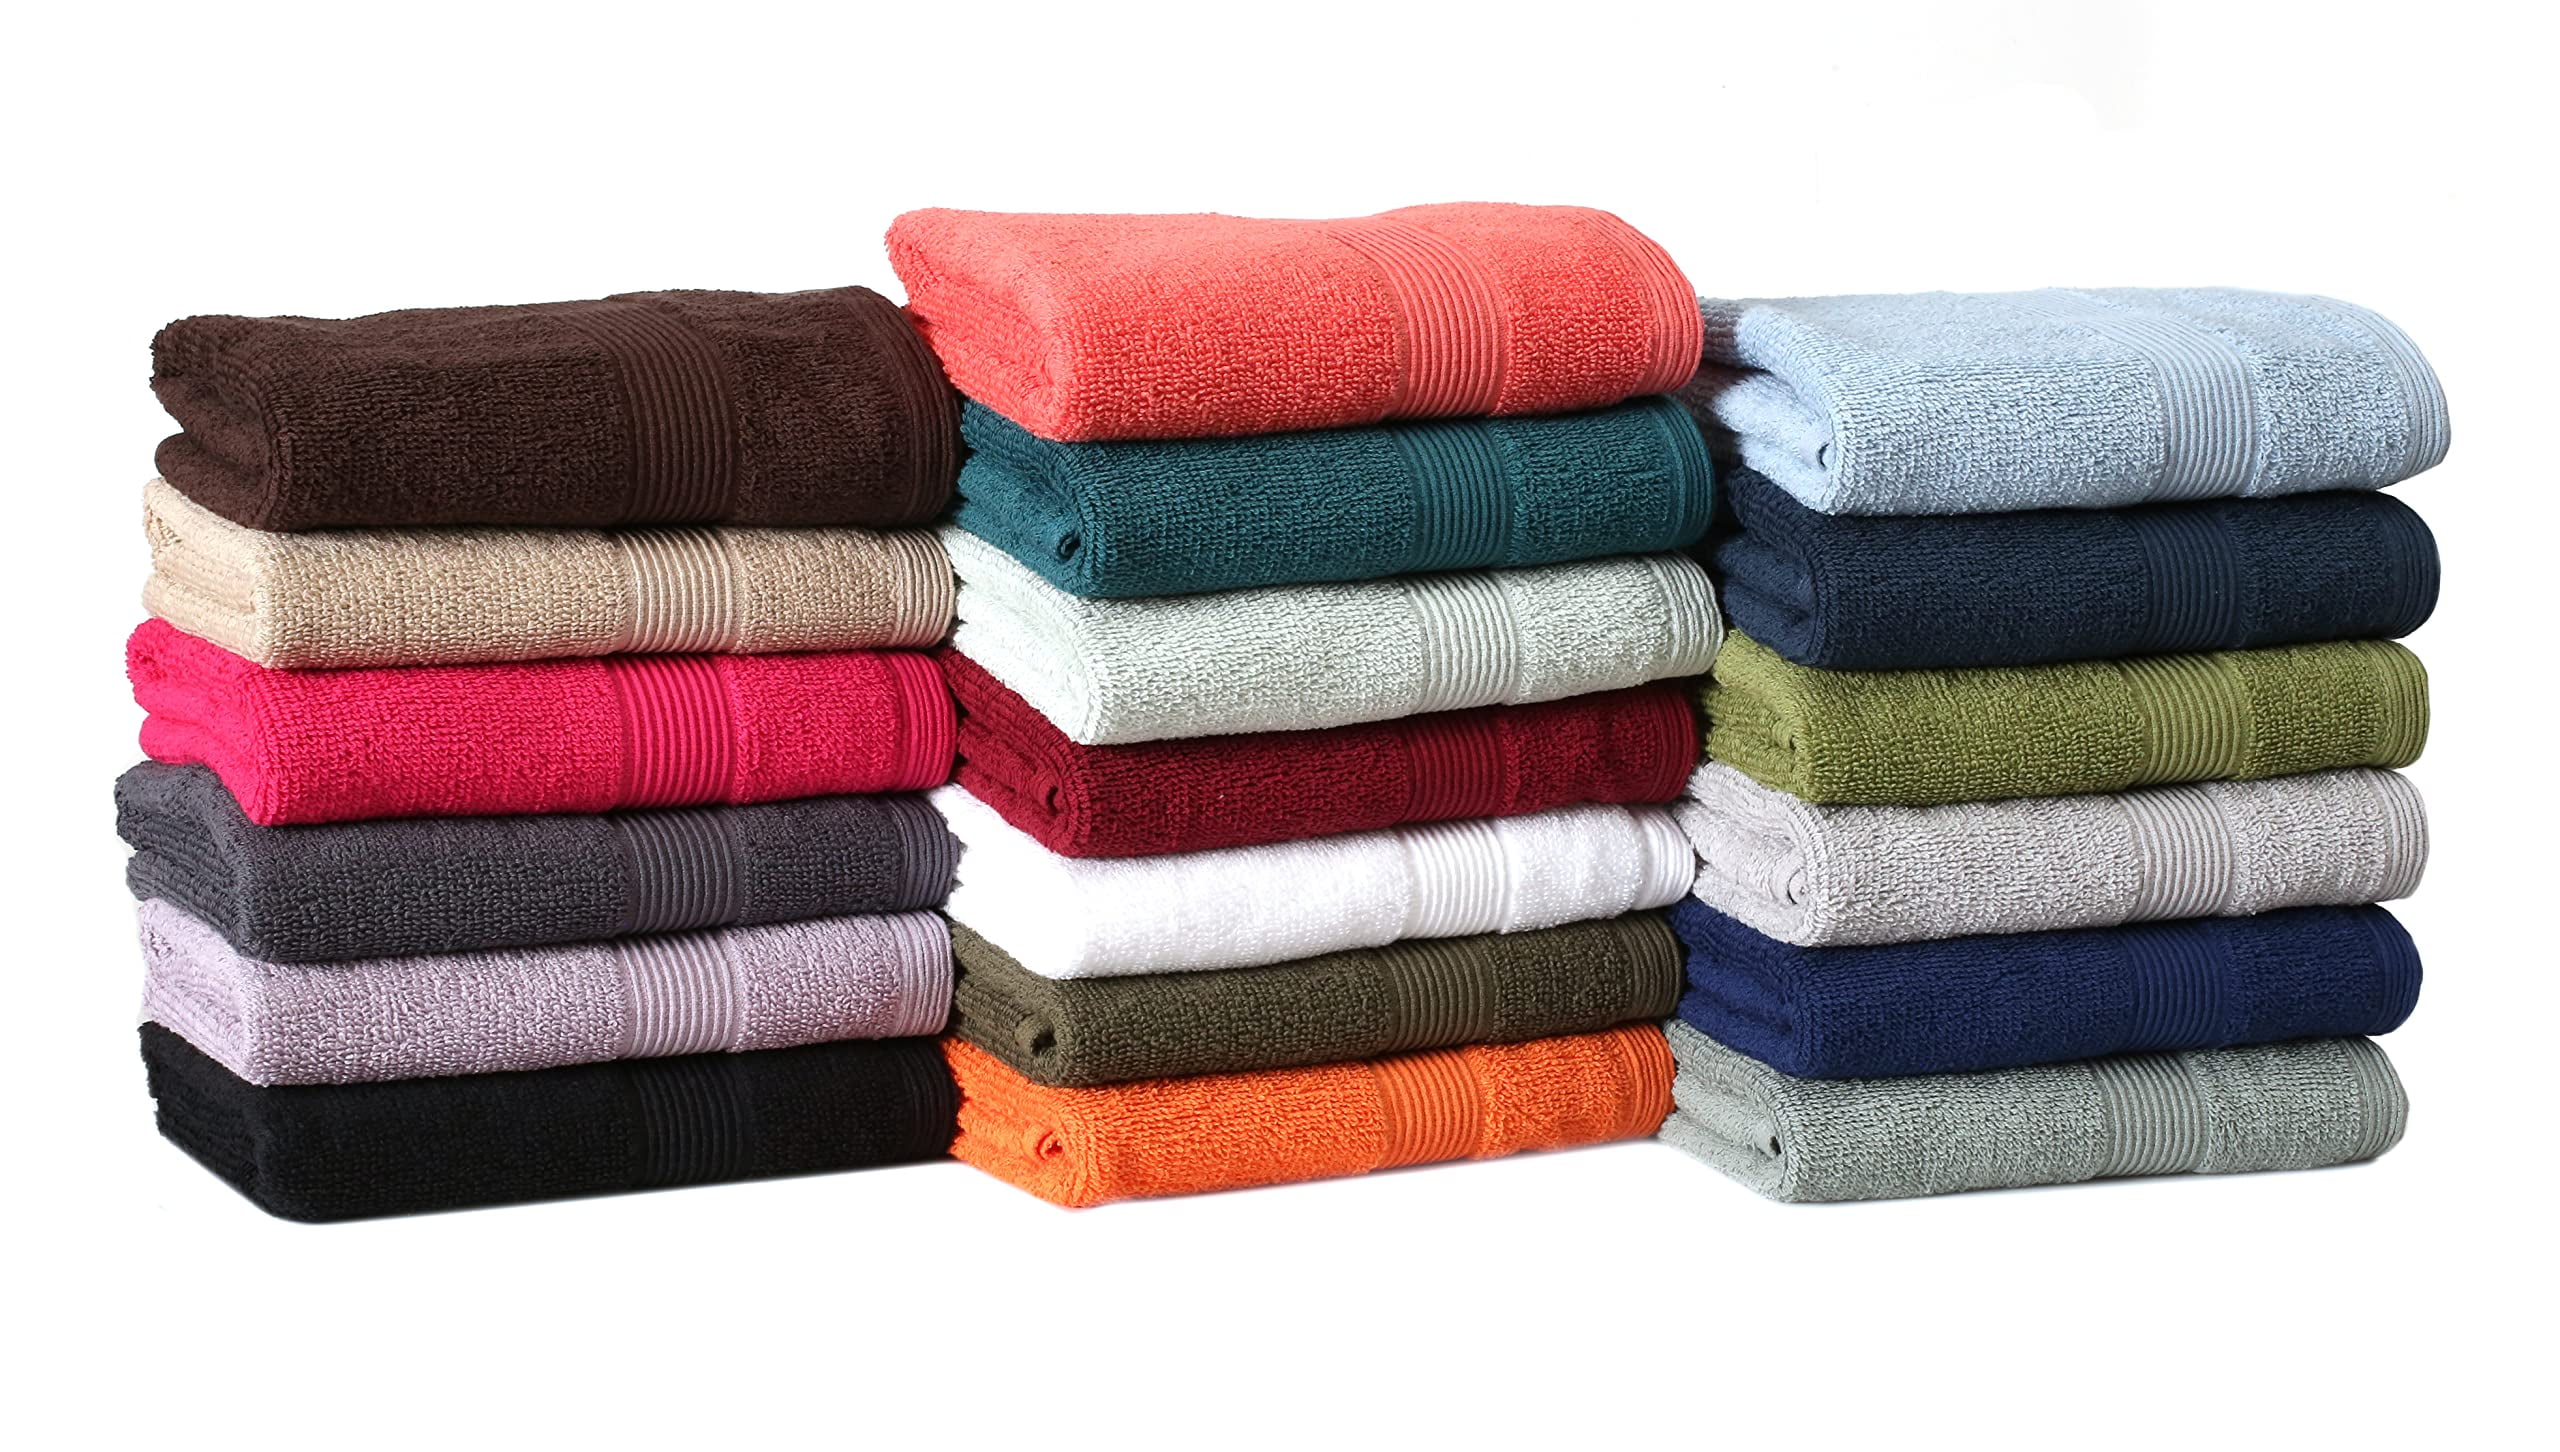 KEEPOZ Kitchen Towels, 15 x 25 Inches, 100% Ring Spun Cotton Super